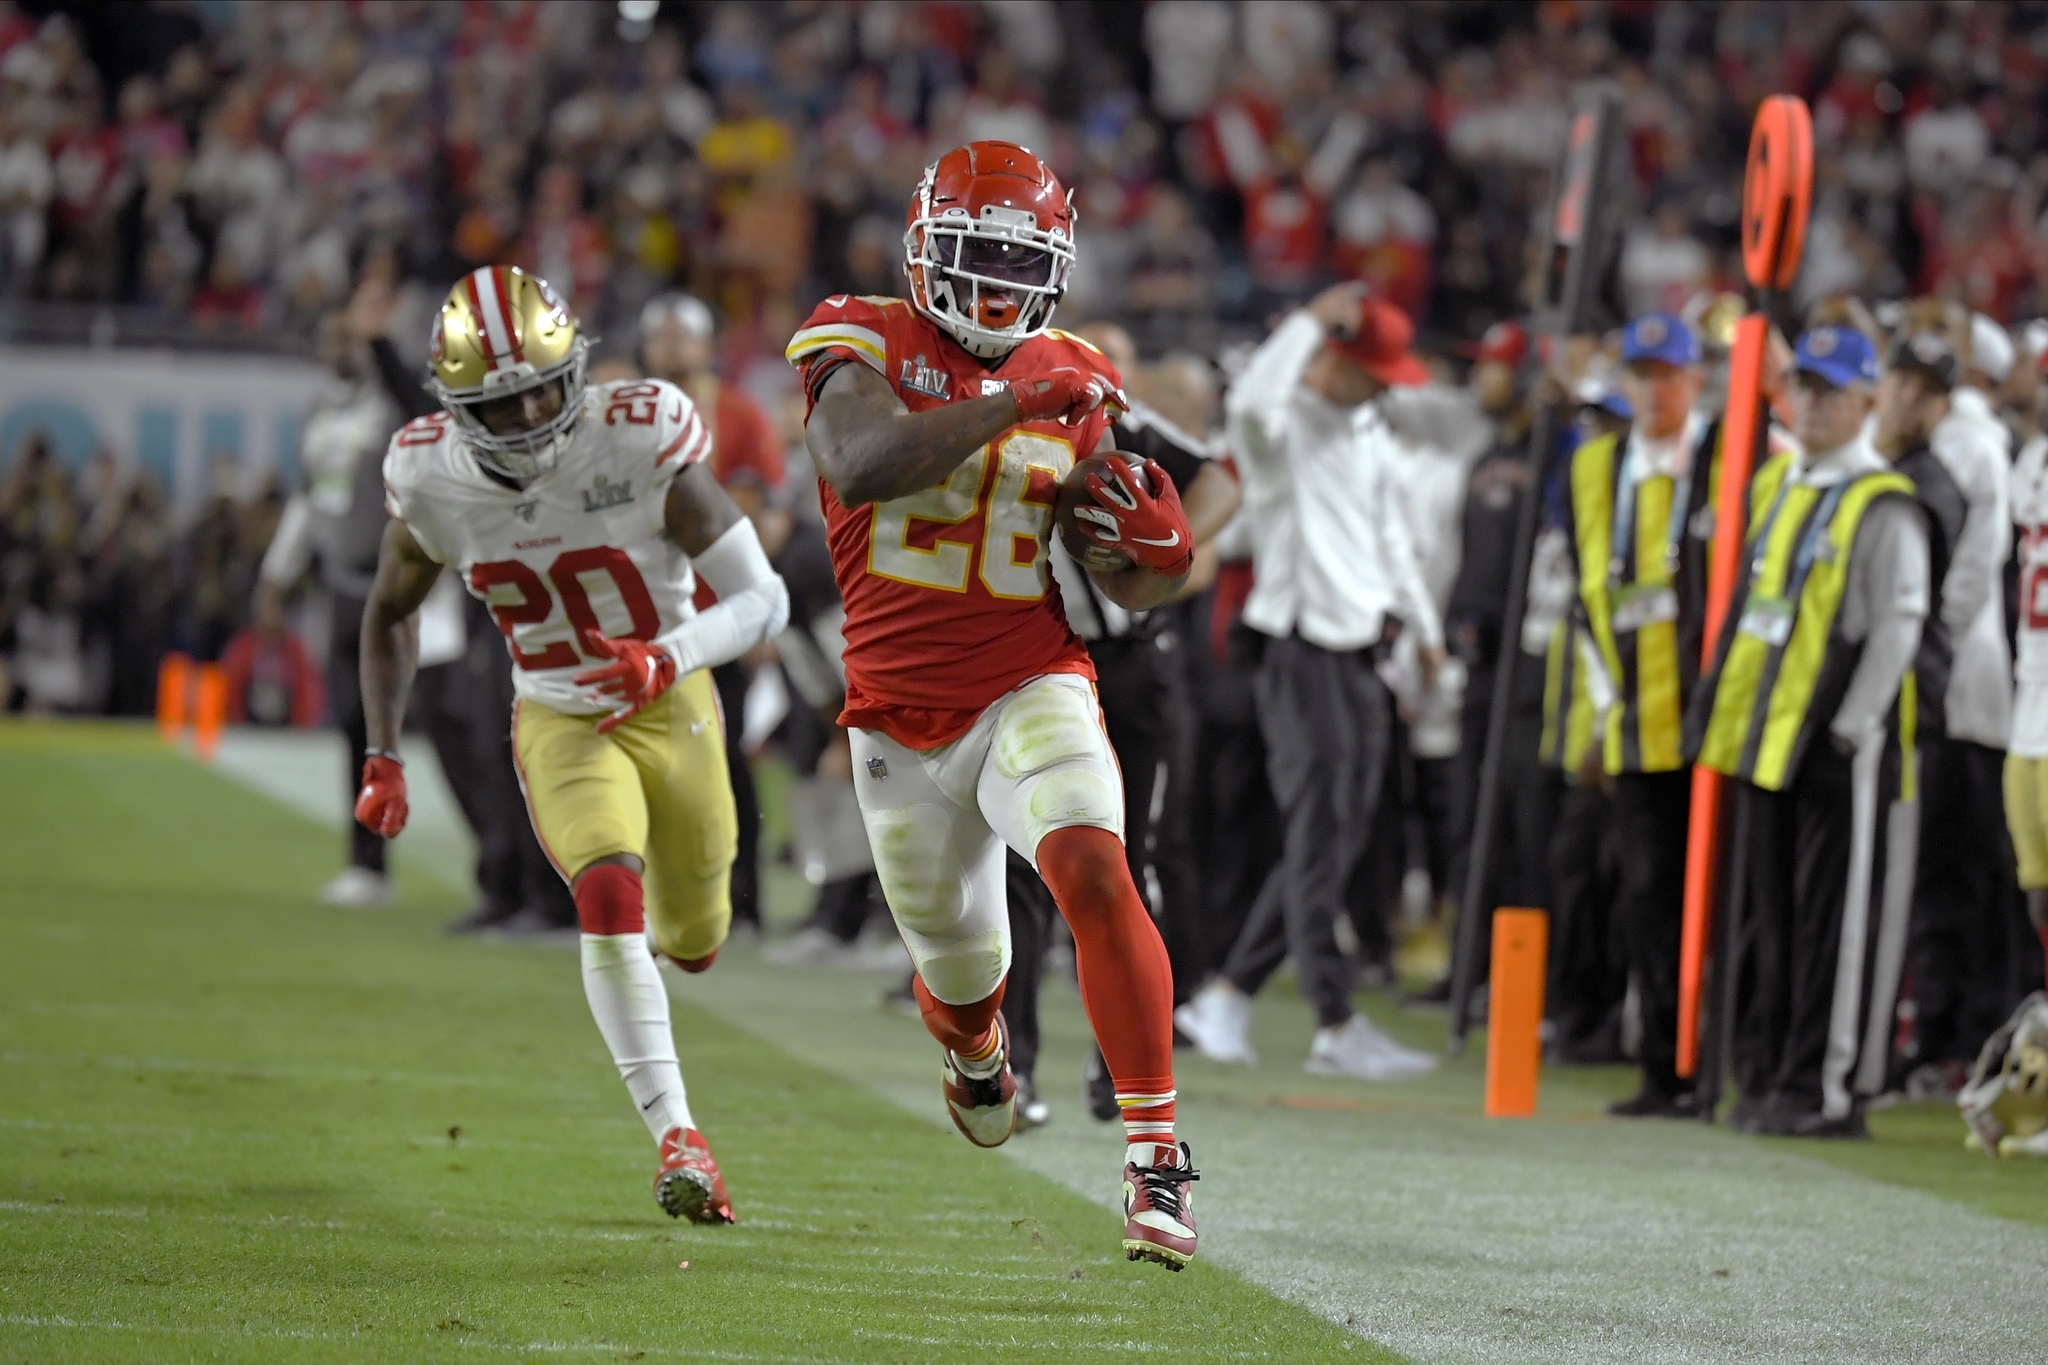 San Francisco 49ers and Kansas City Chiefs will clash again this Sunday.